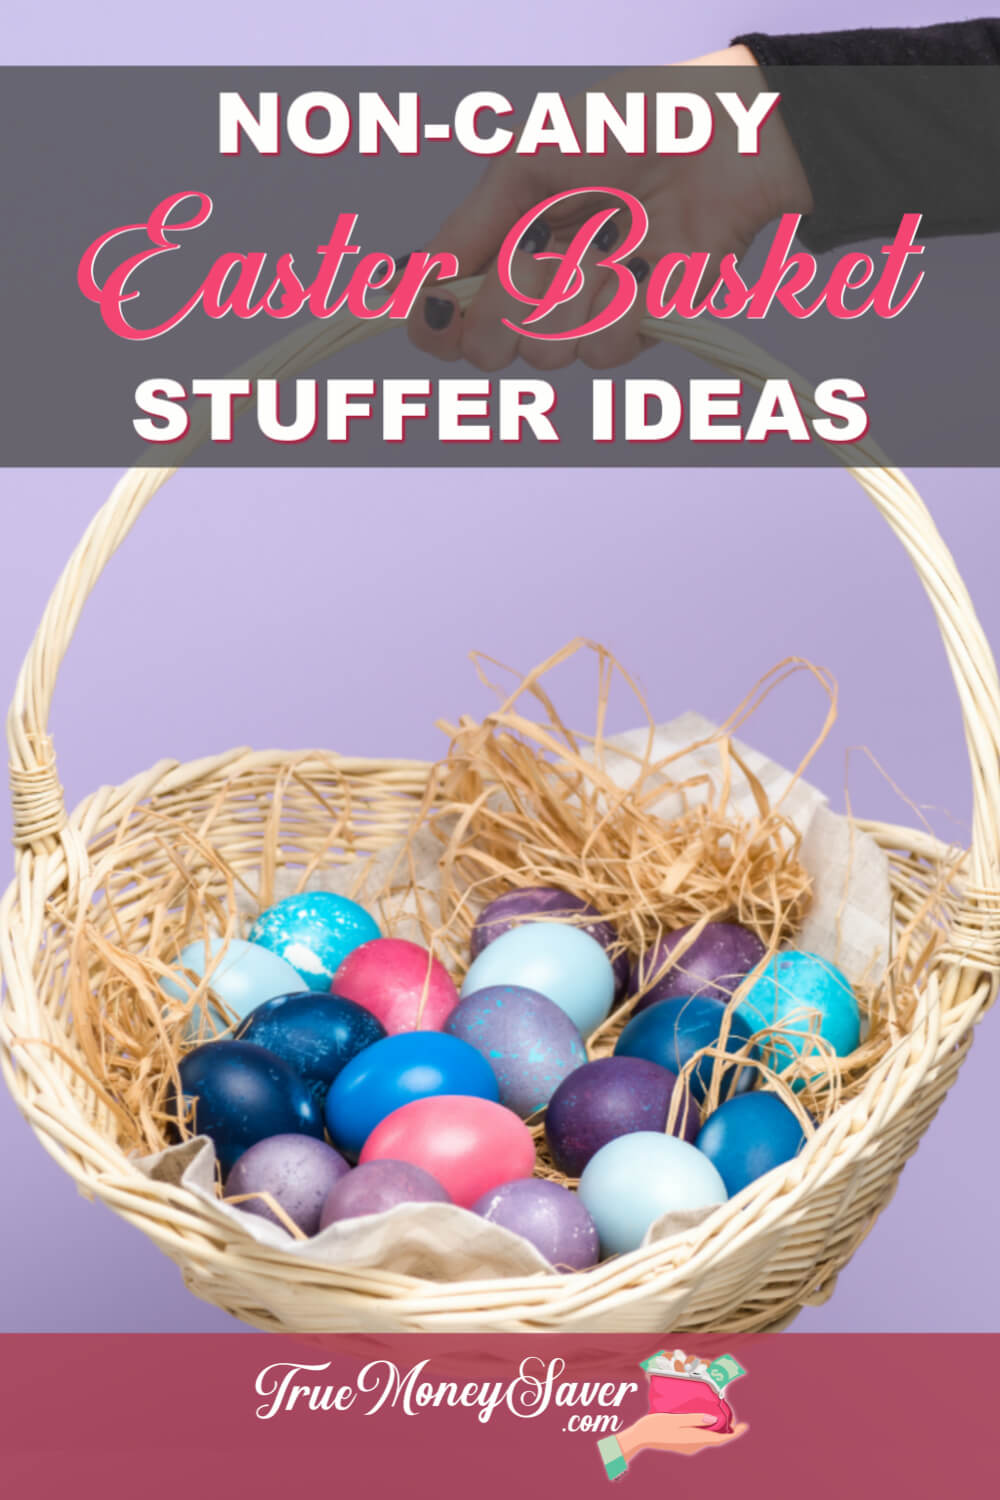 Over 80 Non-Candy Easter Basket Stuffer Ideas